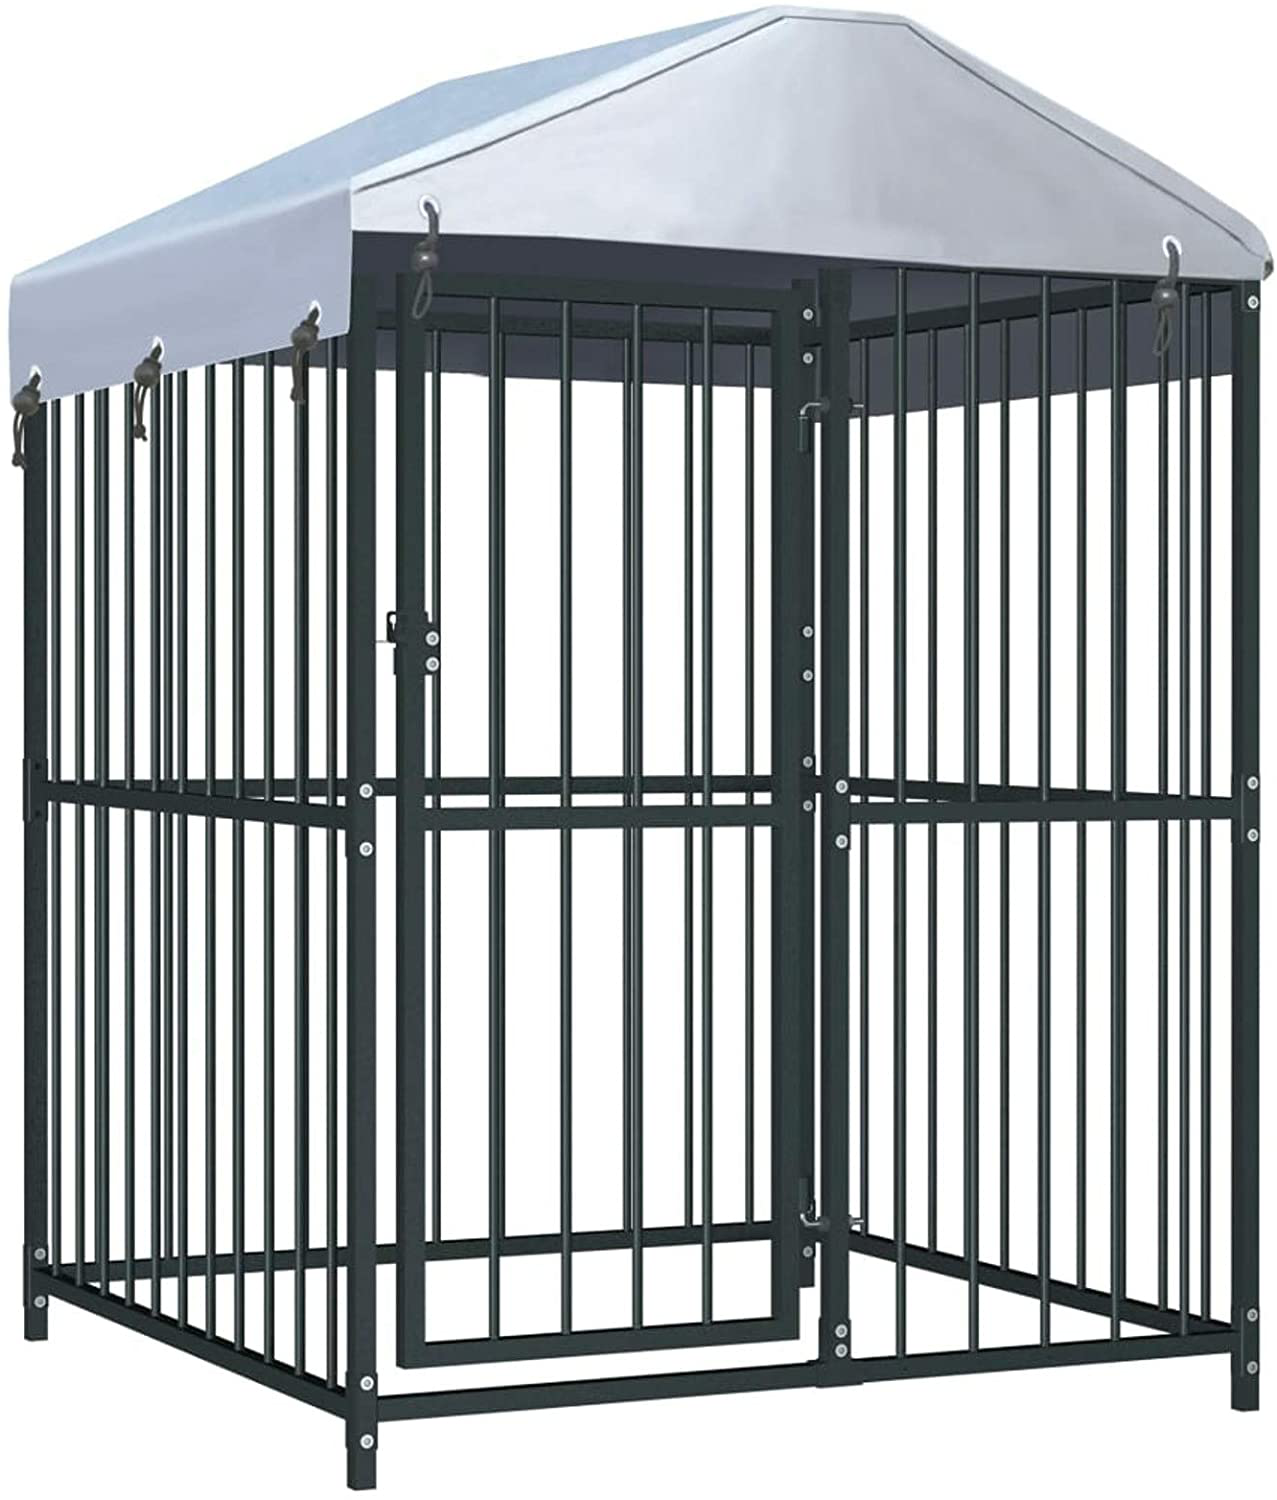 Festnight Outdoor Dog Kennel Cage Heavy Duty Galvanized Steel Pet Run House with Shelter Cover Bar Sidewalls Fence Playpen for Backyard Garden 47.2" X 47.2" X 59 Inches (L X W X H) Animals & Pet Supplies > Pet Supplies > Dog Supplies > Dog Kennels & Runs Festnight   